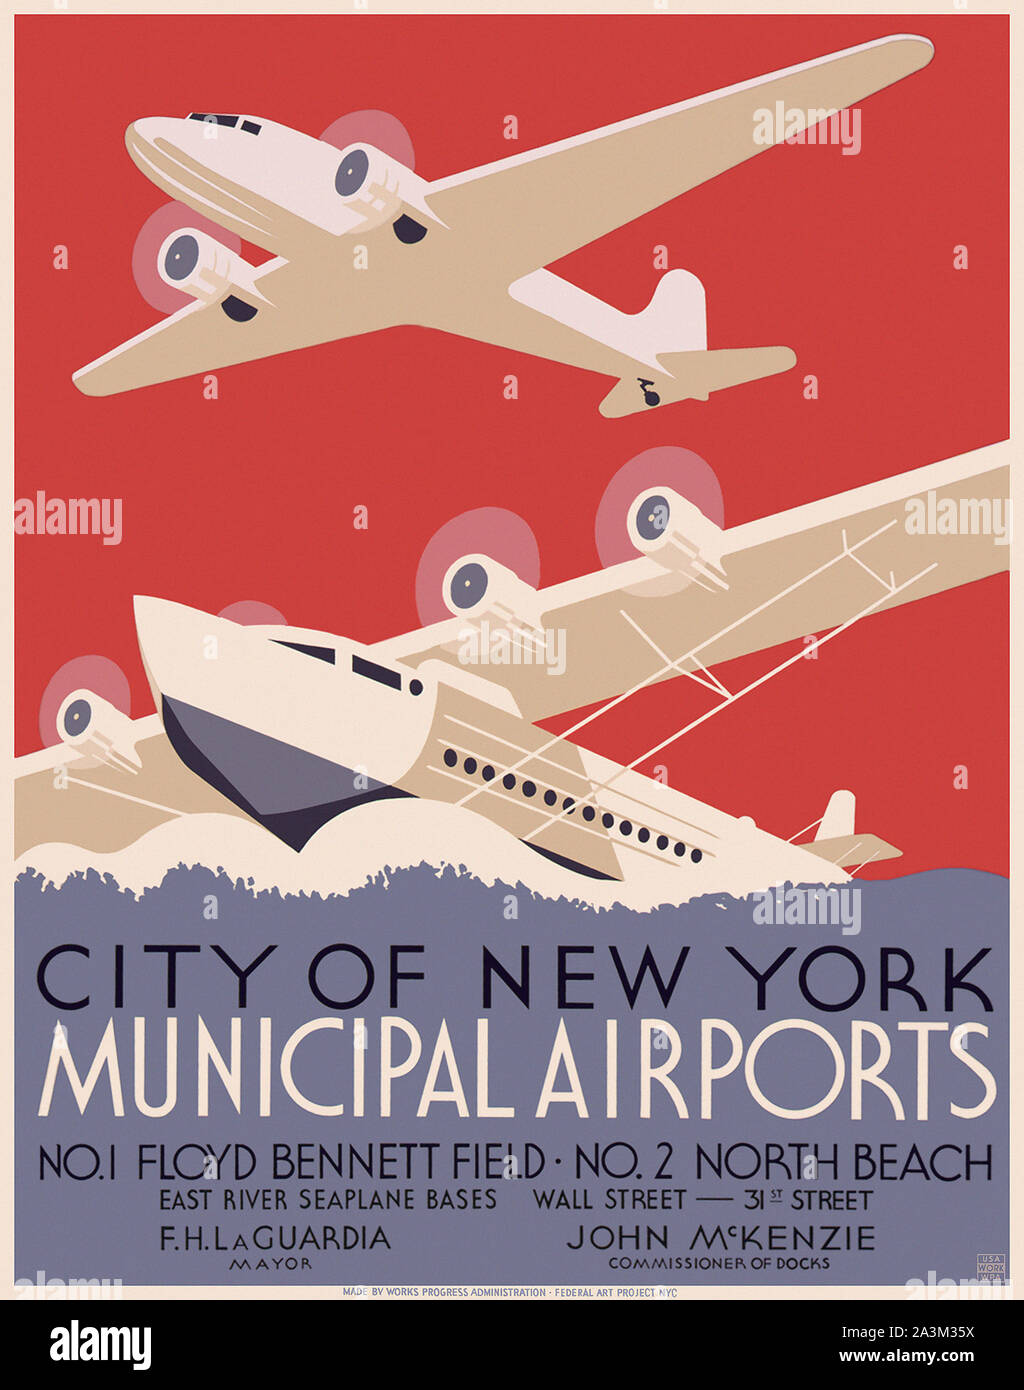 New York City municipal airports  - Work Progress Administration - Federal Art Project -  Vintage poster 1937 Stock Photo